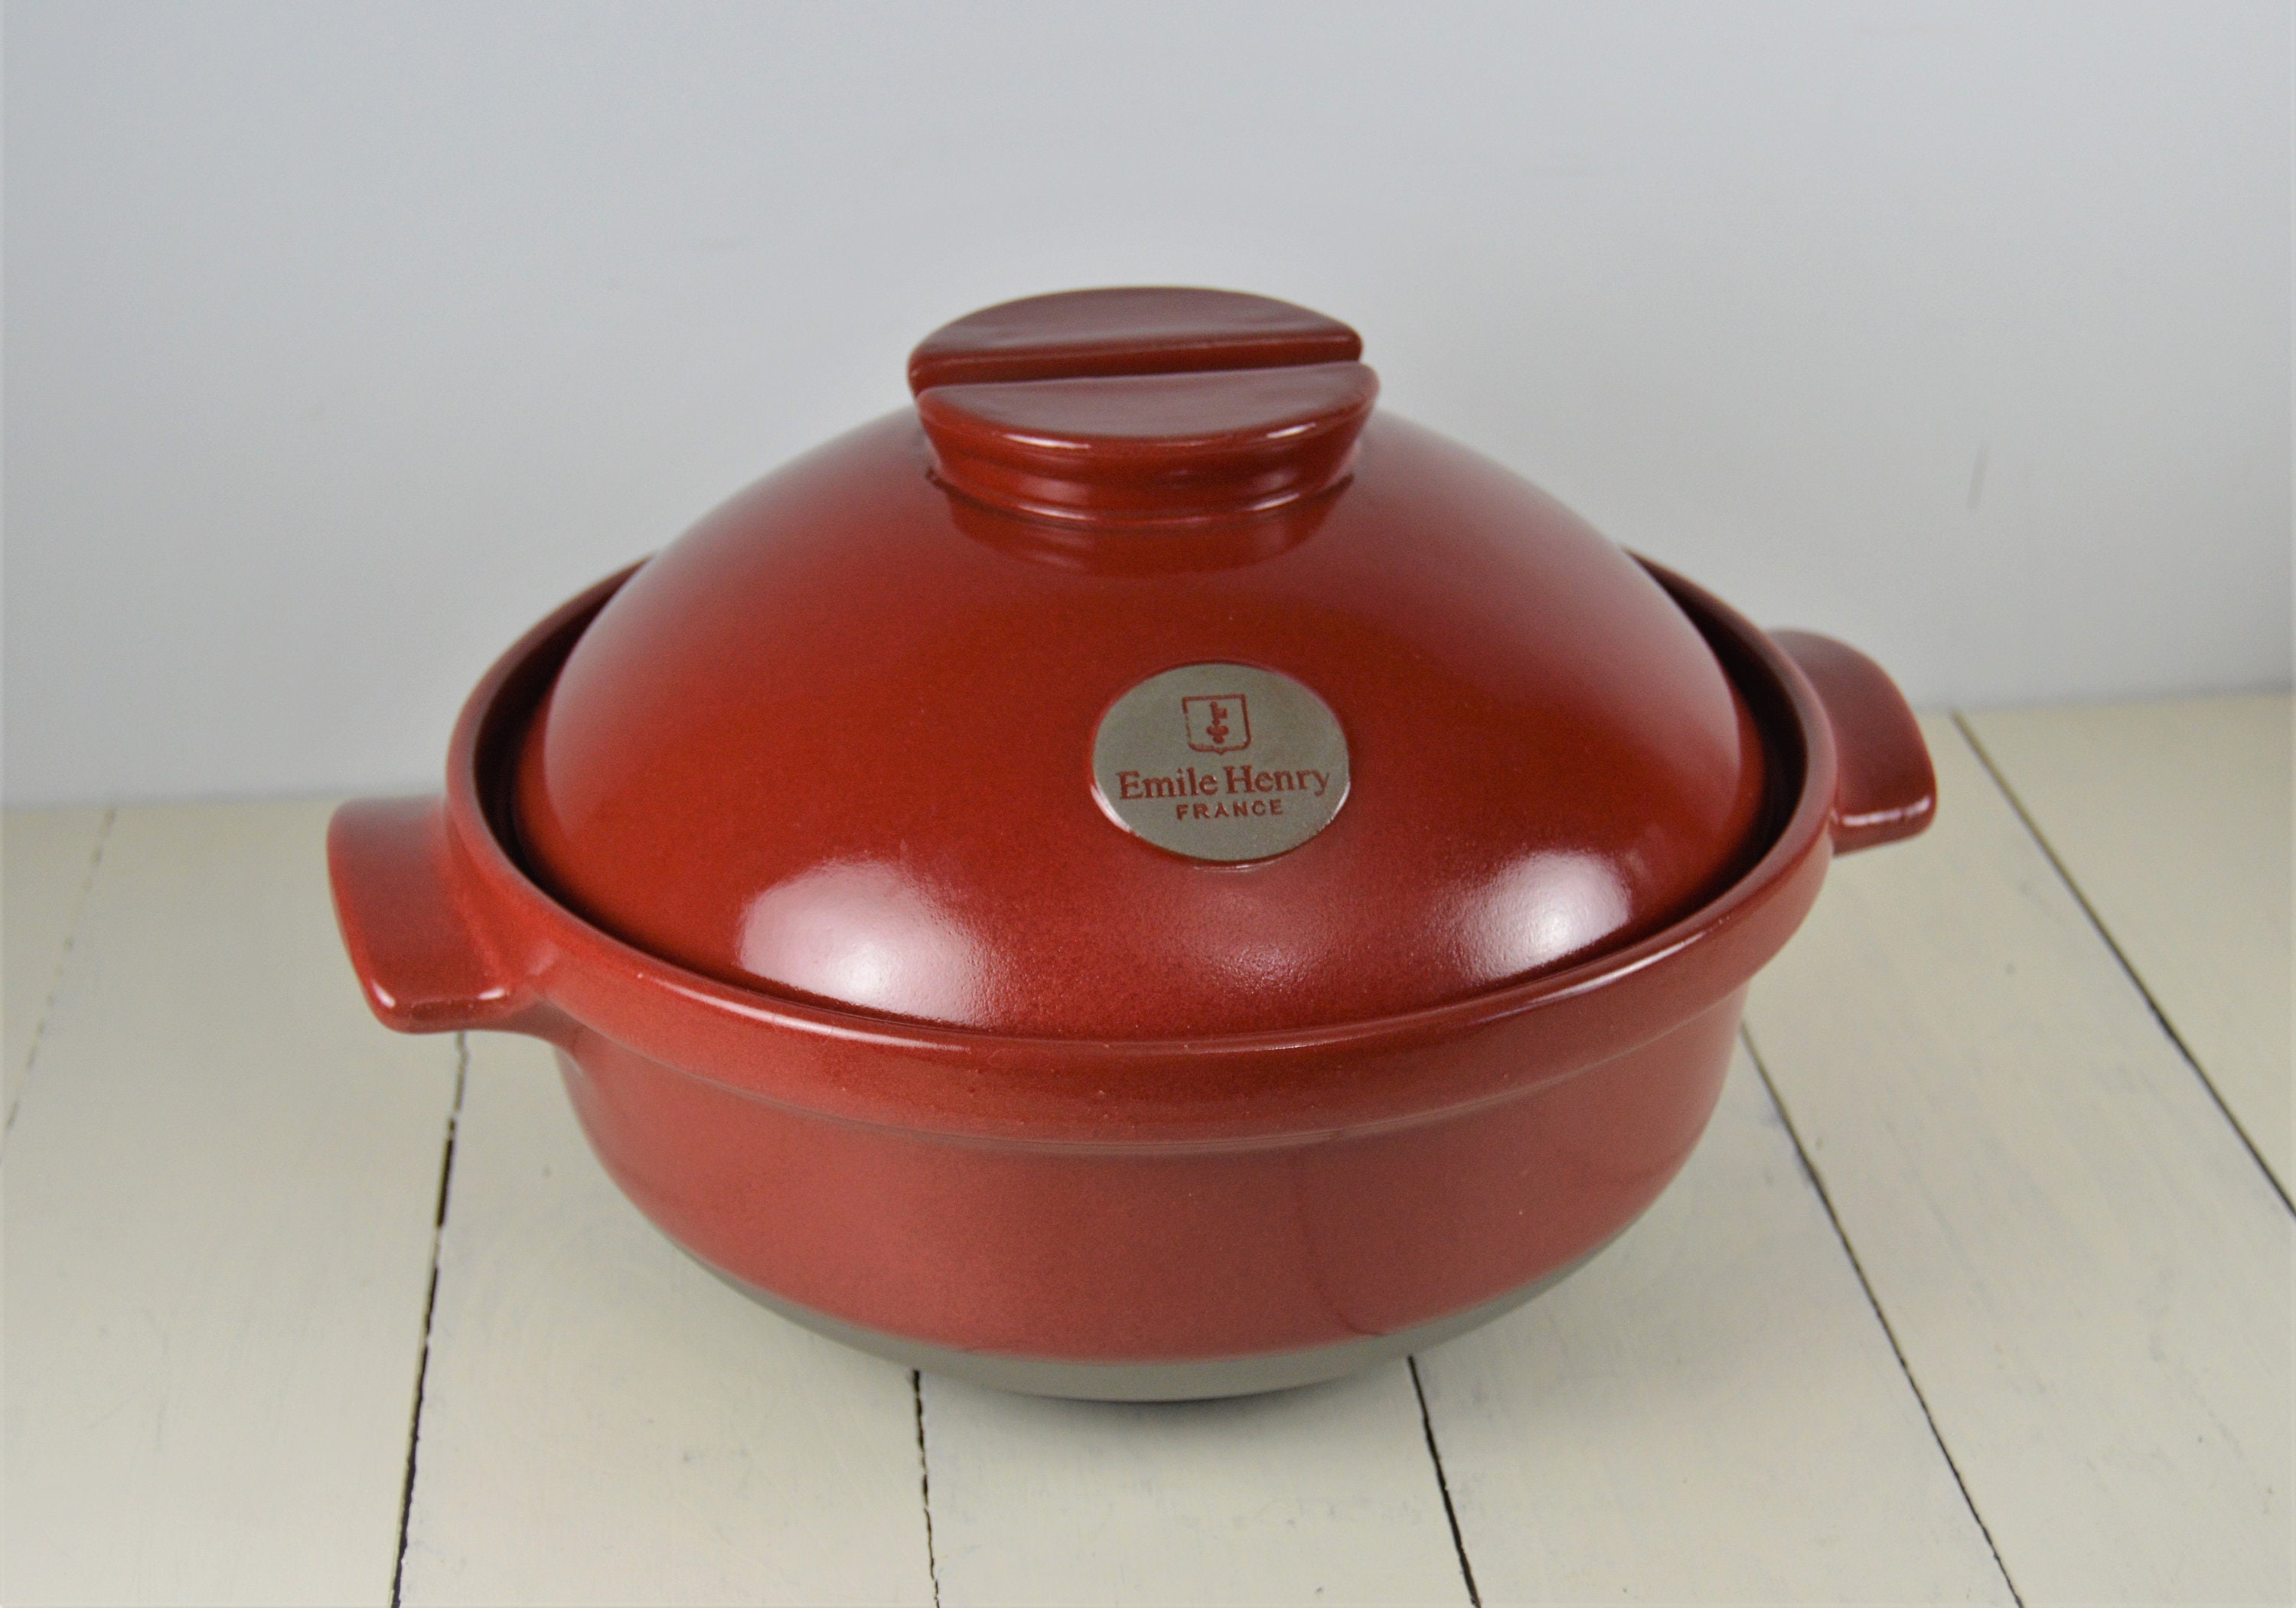 Emile Henry Flame Round Dutch Oven / Stewpot - Gift Idea For Women